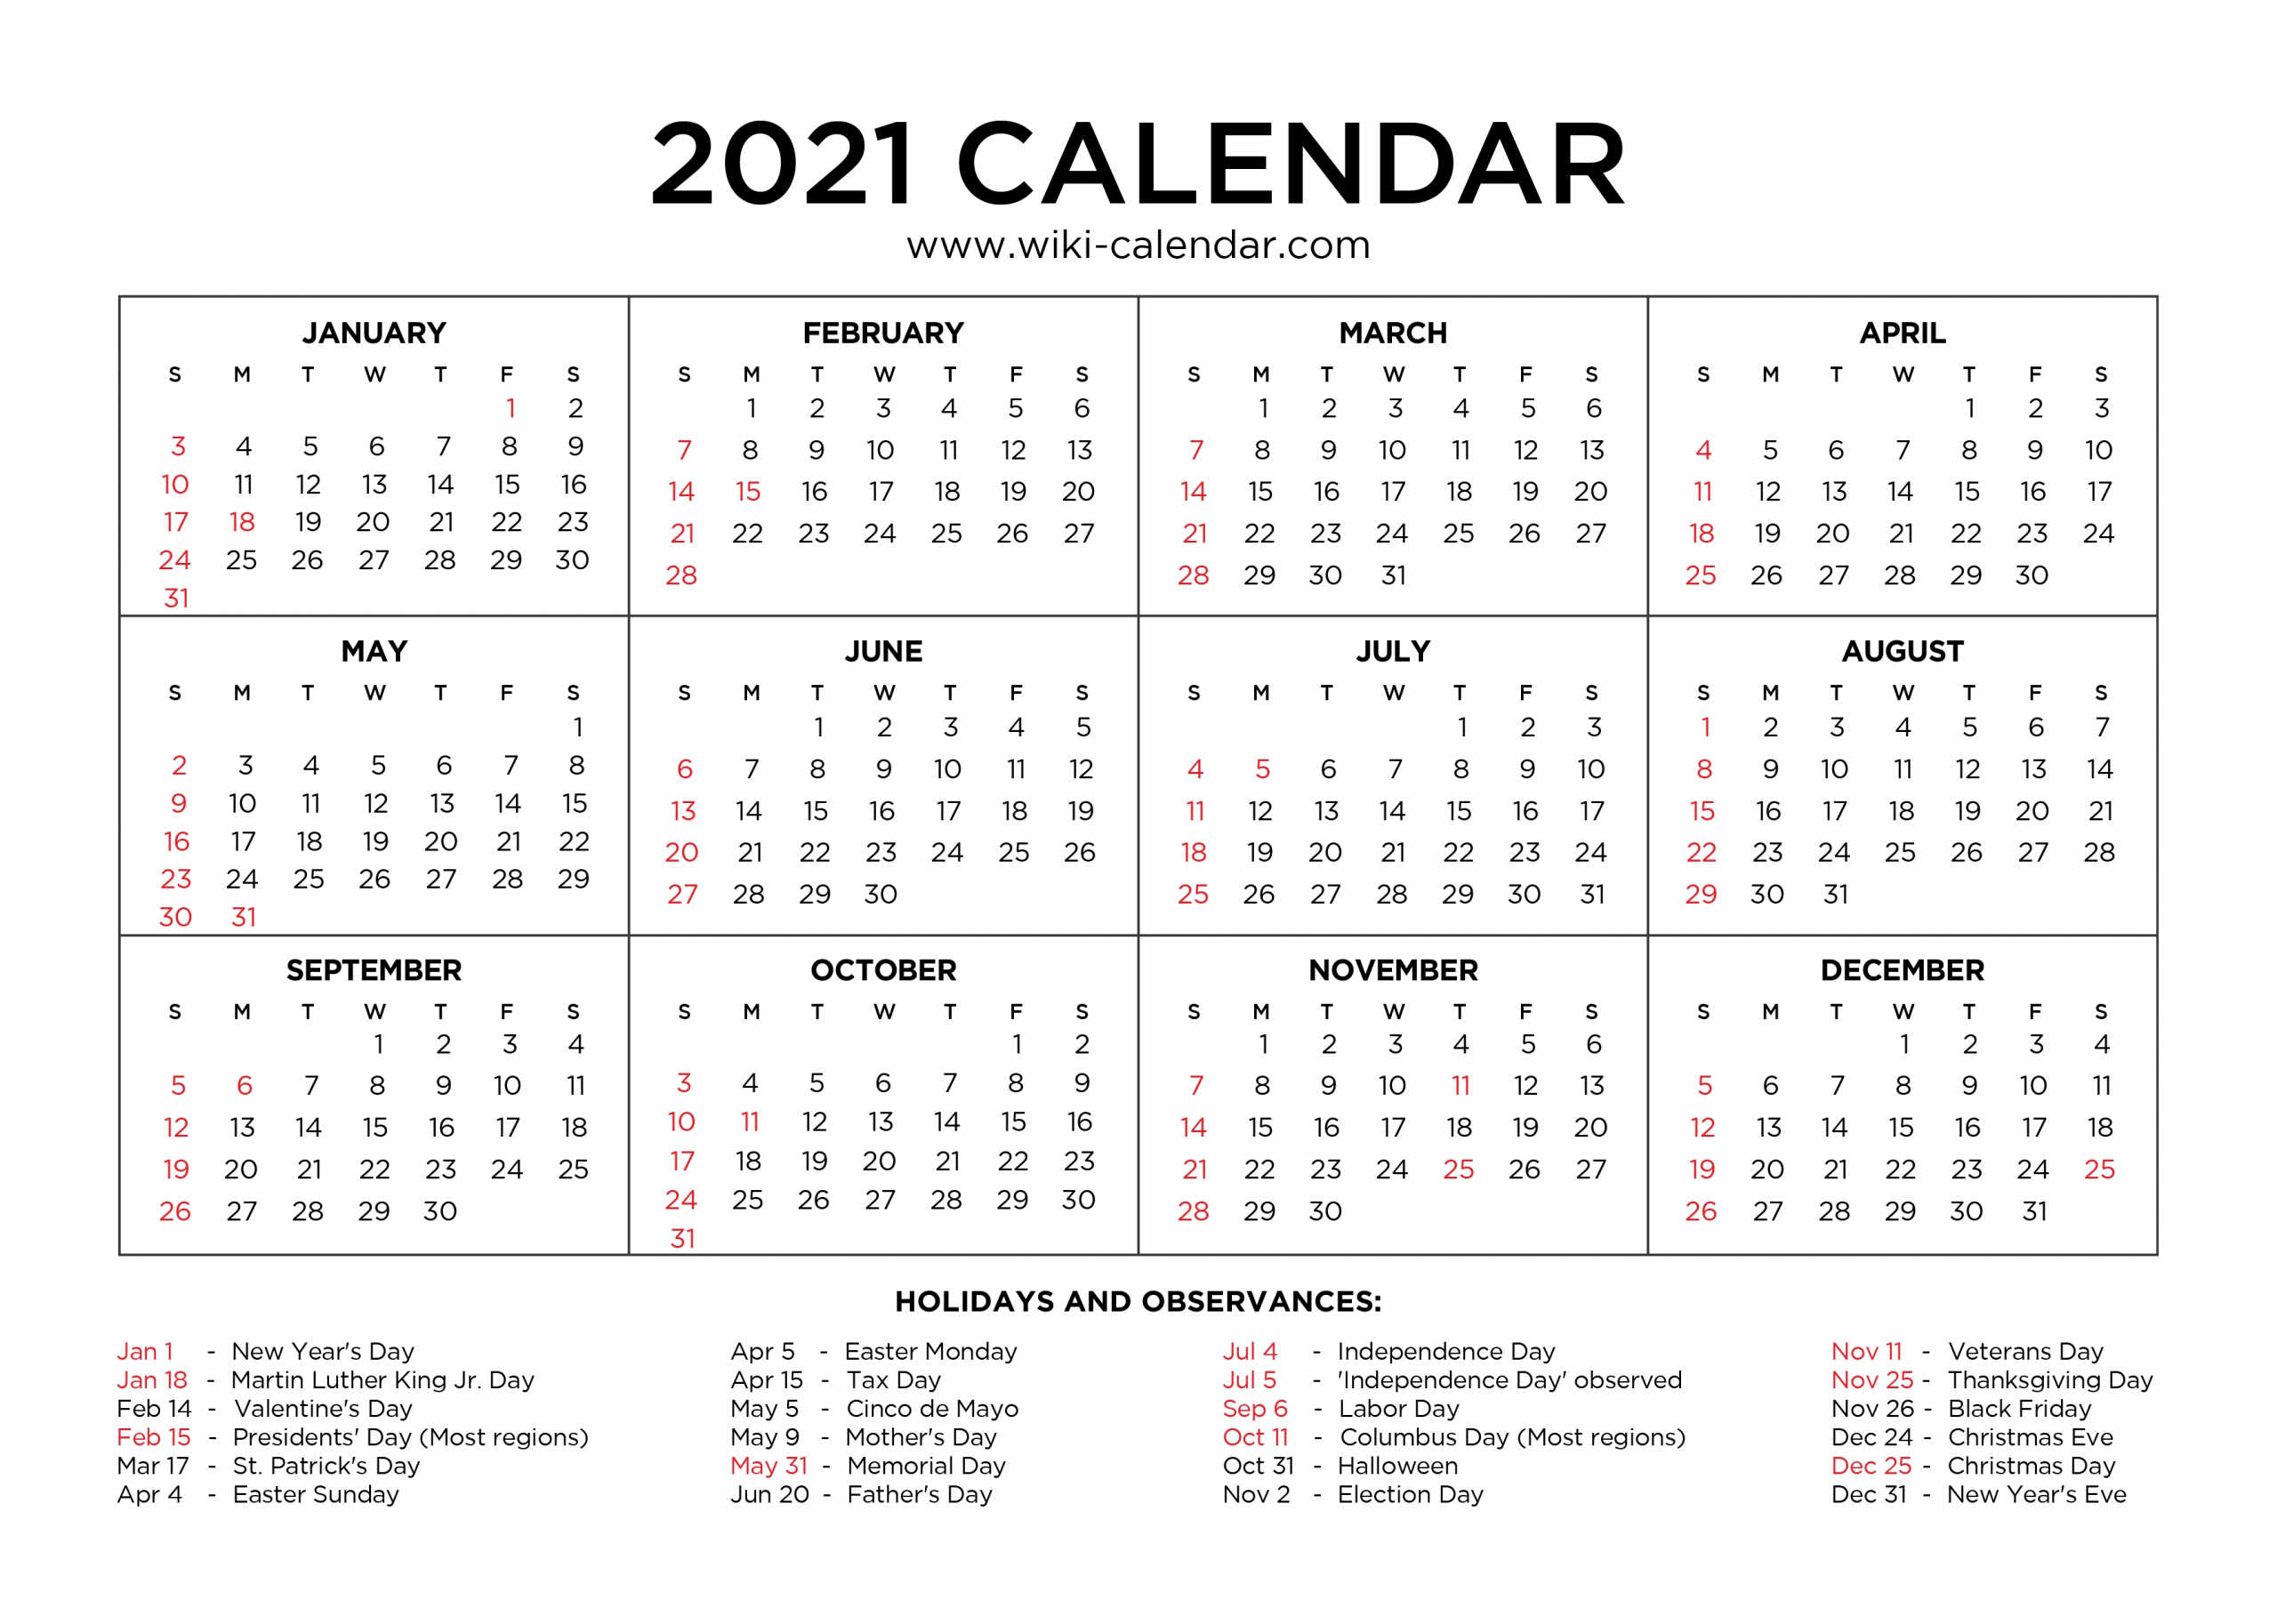 Free Printable Year 2021 Calendar With Holidays-Print Free 2021 Calendars Without Downloading